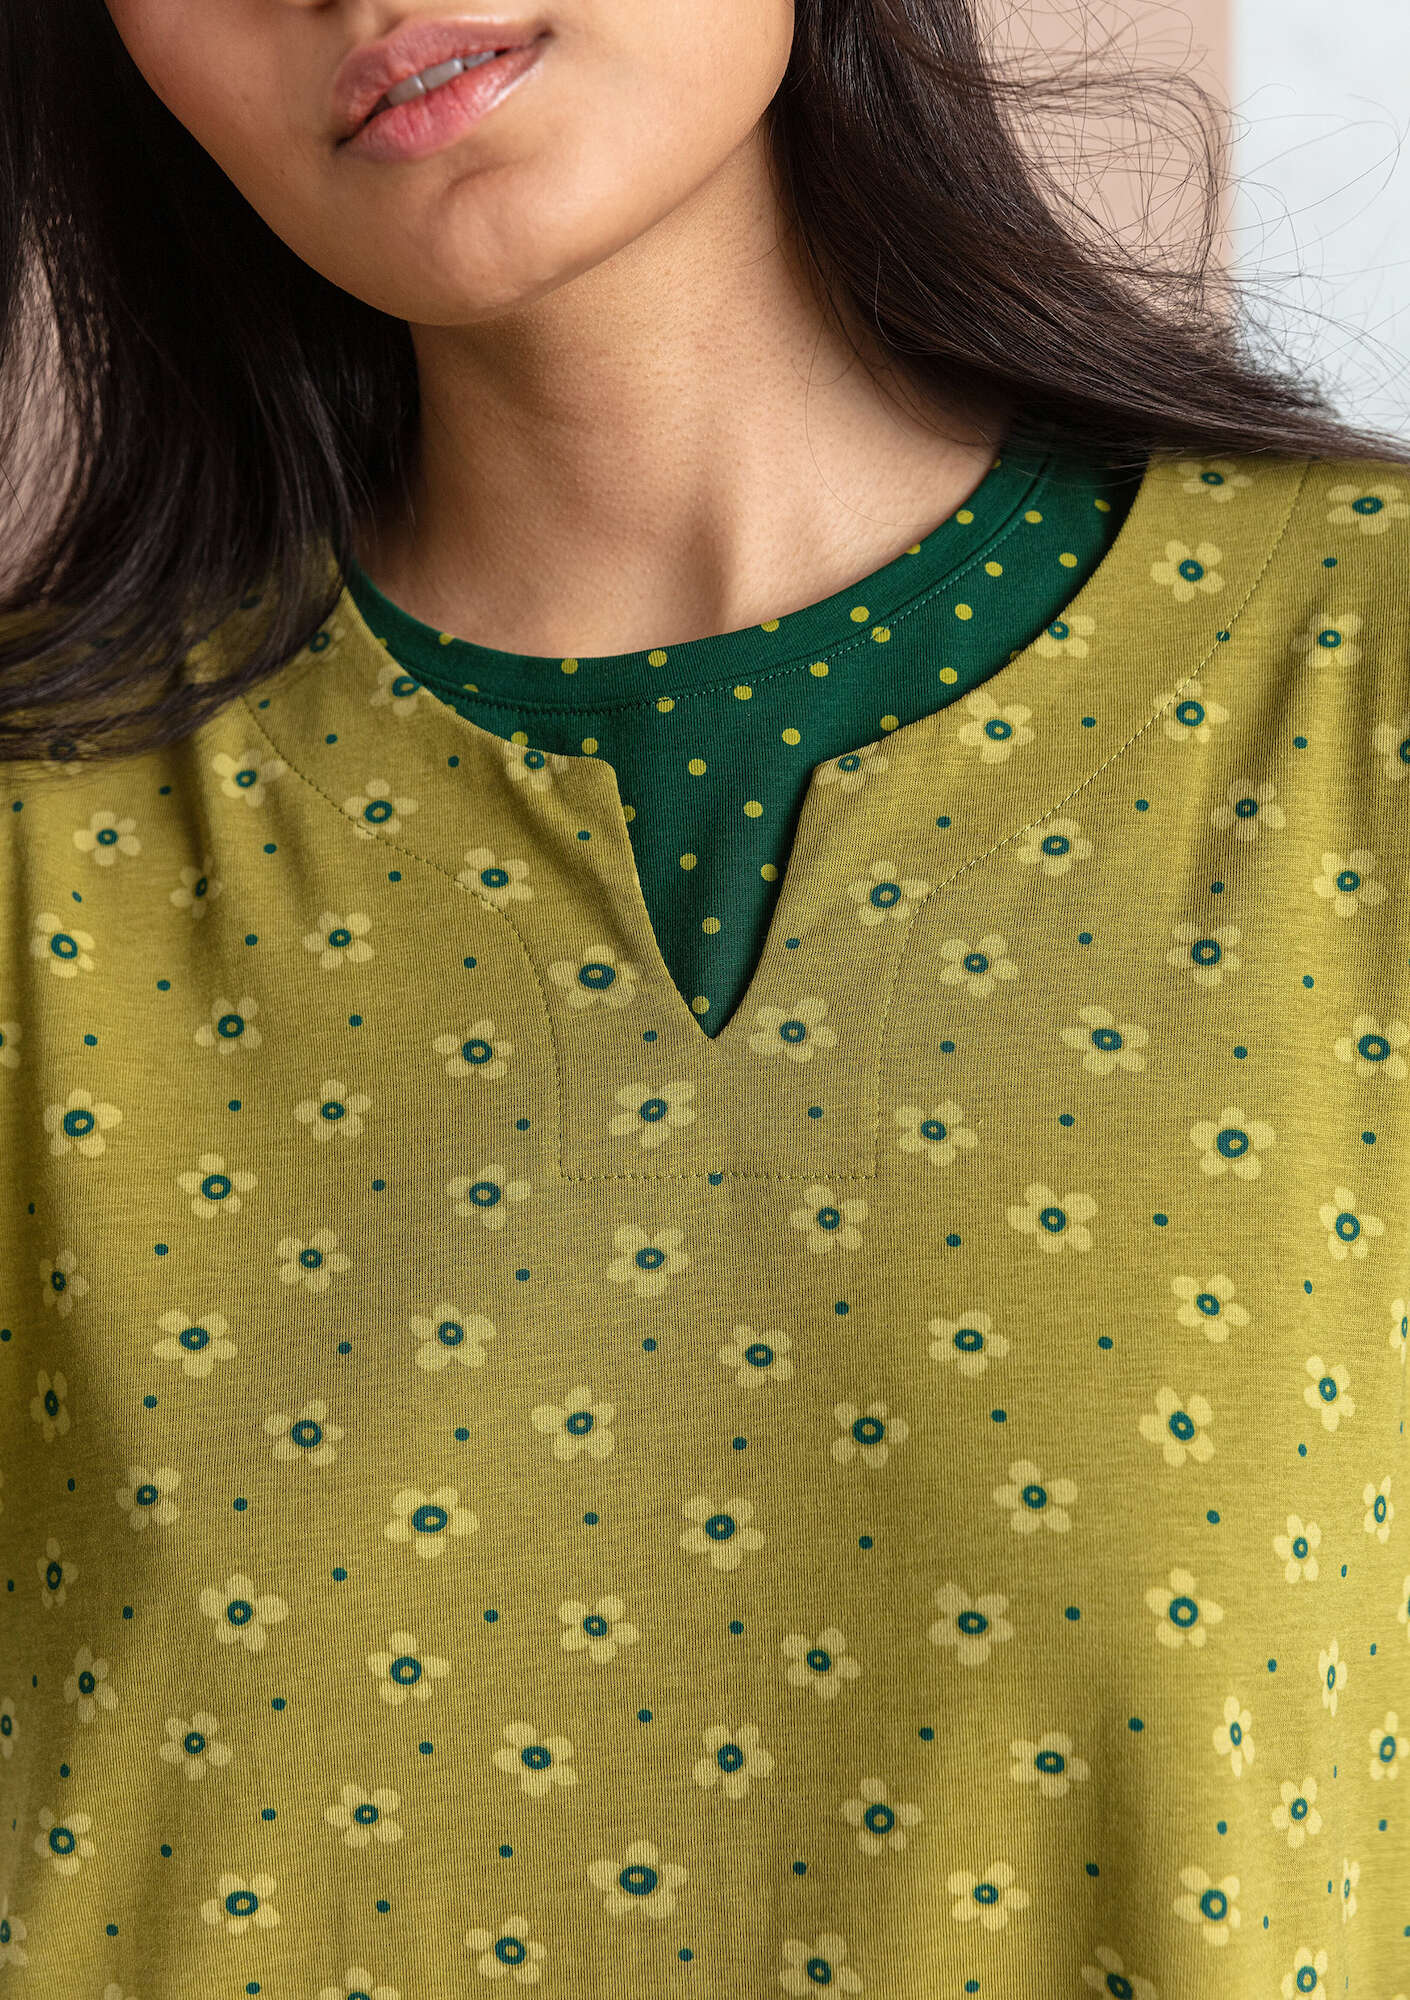 “Belle” jersey dress in organic cotton/spandex avocado/patterned thumbnail